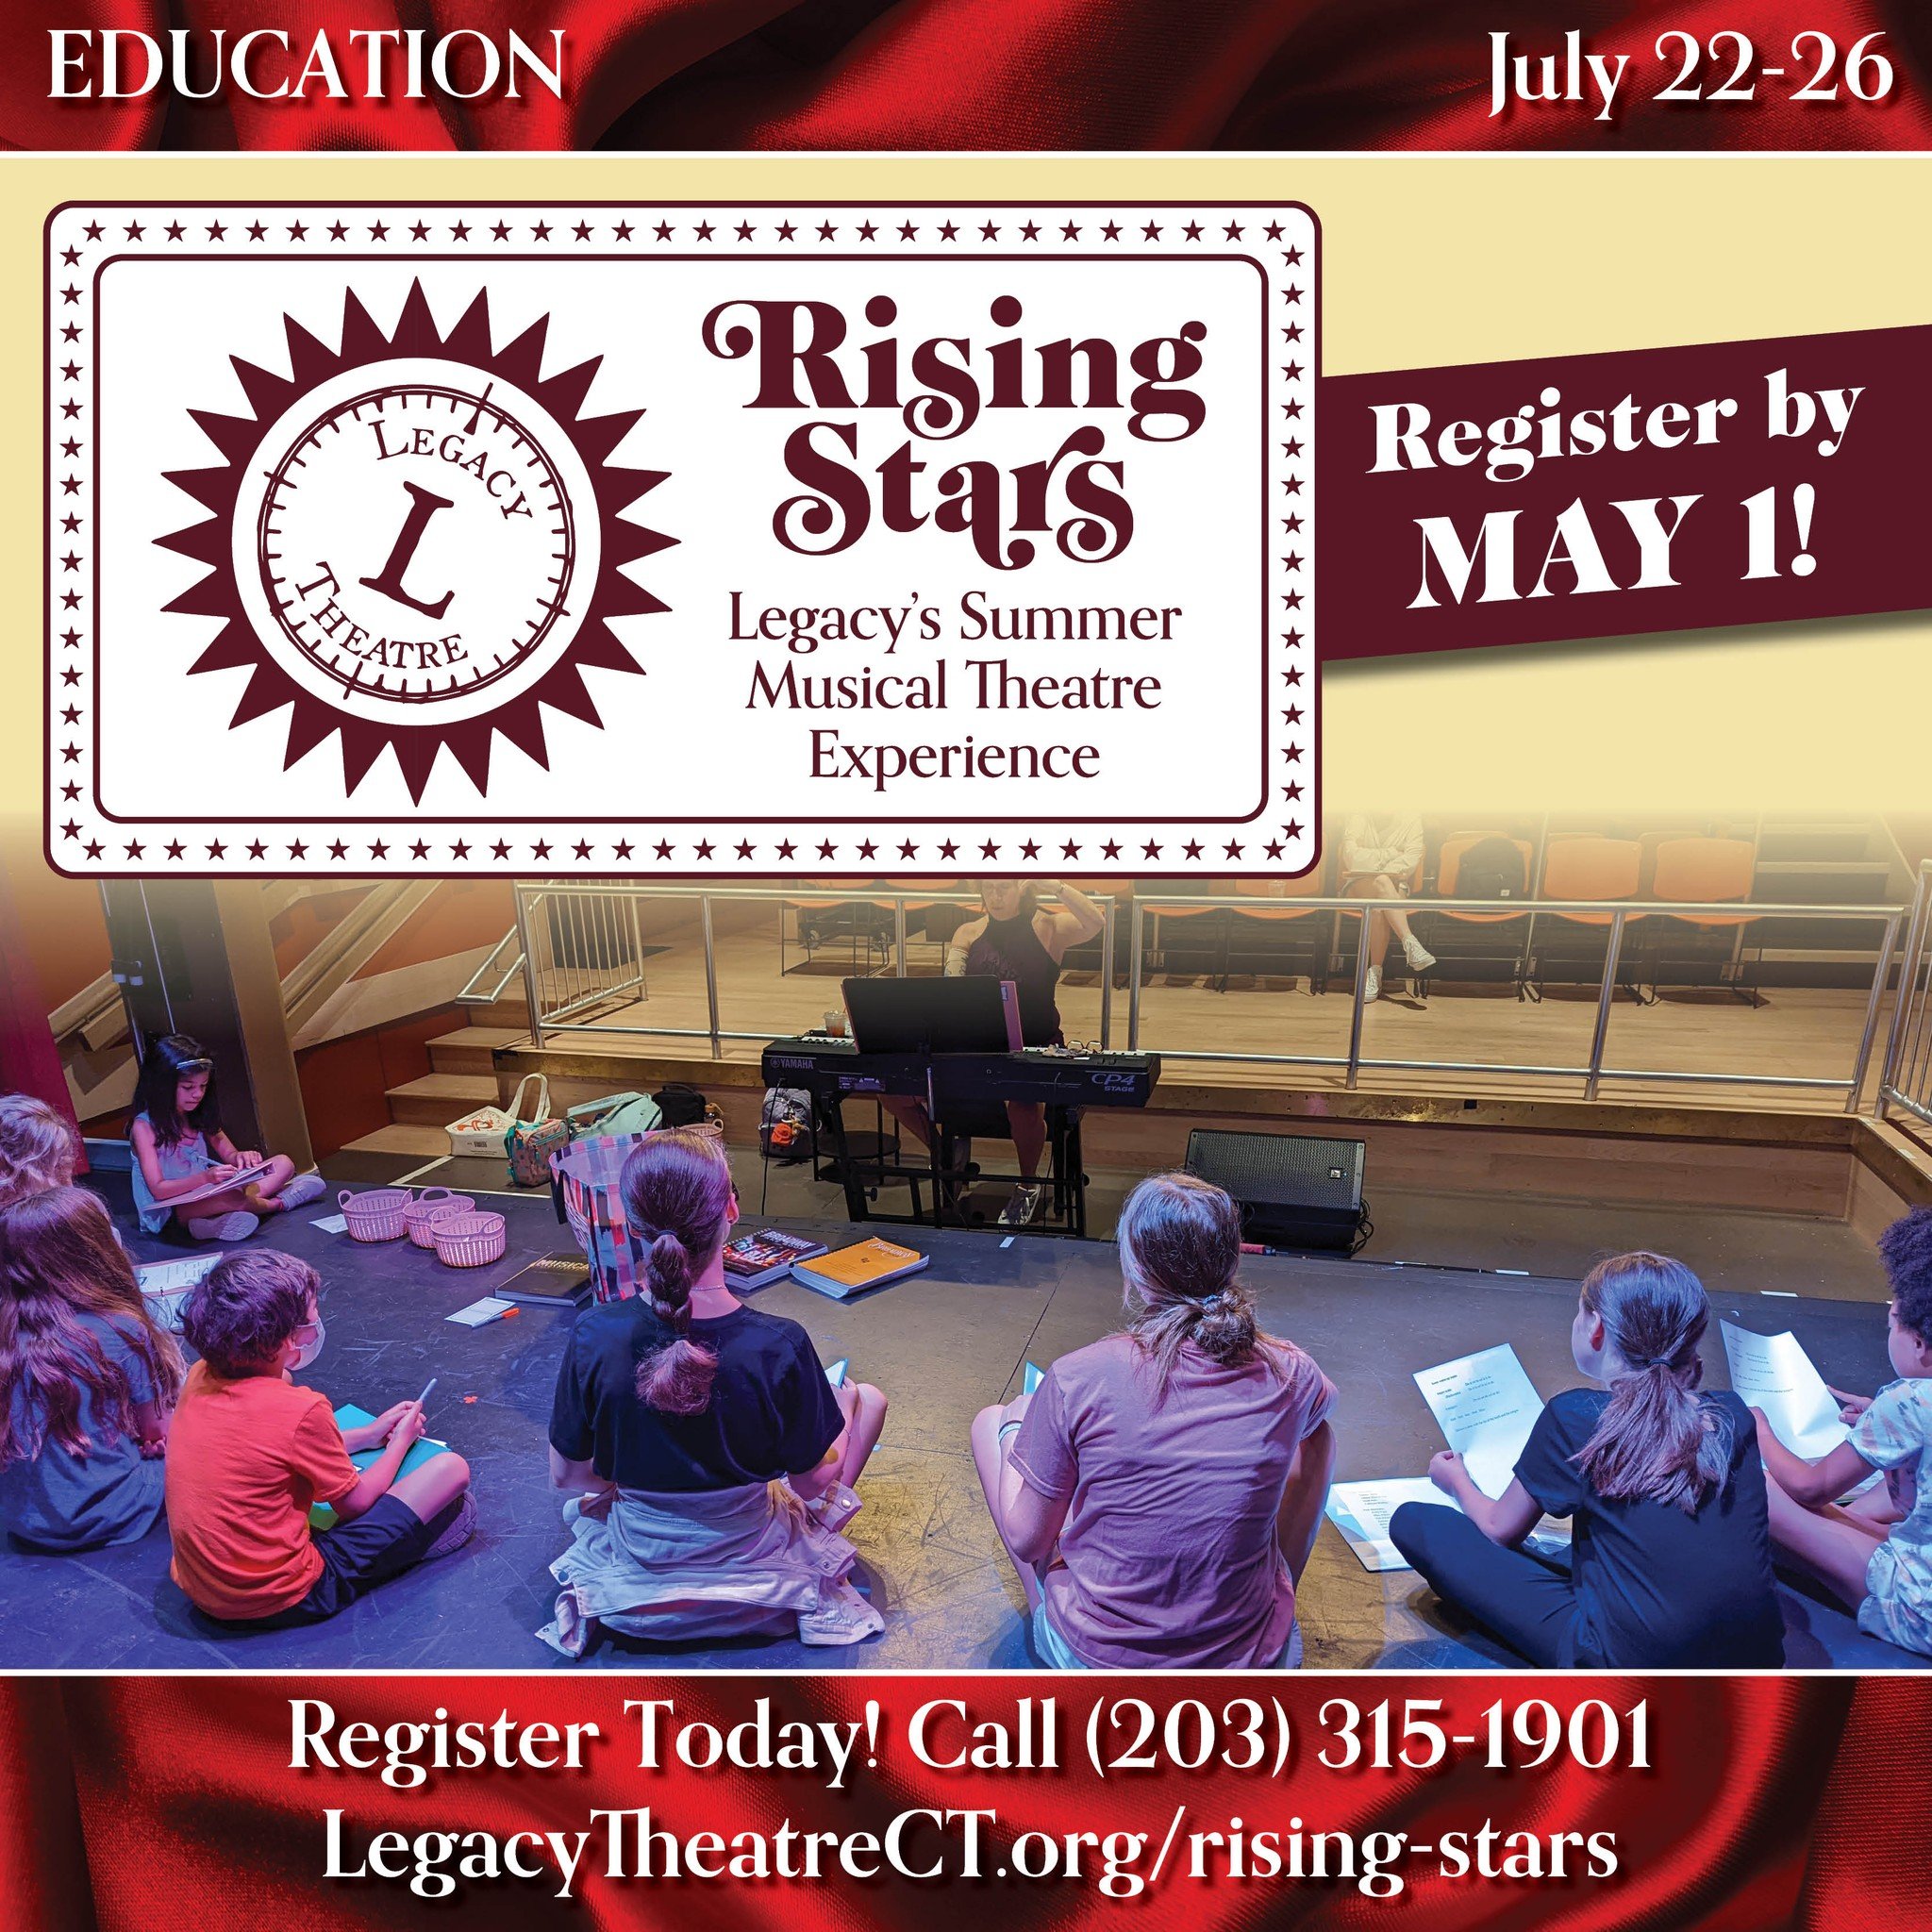 Register by May 1 for our Rising Stars: Summer Musical Theatre Experience! Spend a week learning from industry professionals at the beautiful Legacy Theatre in Branford, CT. Students will work on voice, dance, acting, and more, all inside a newly res